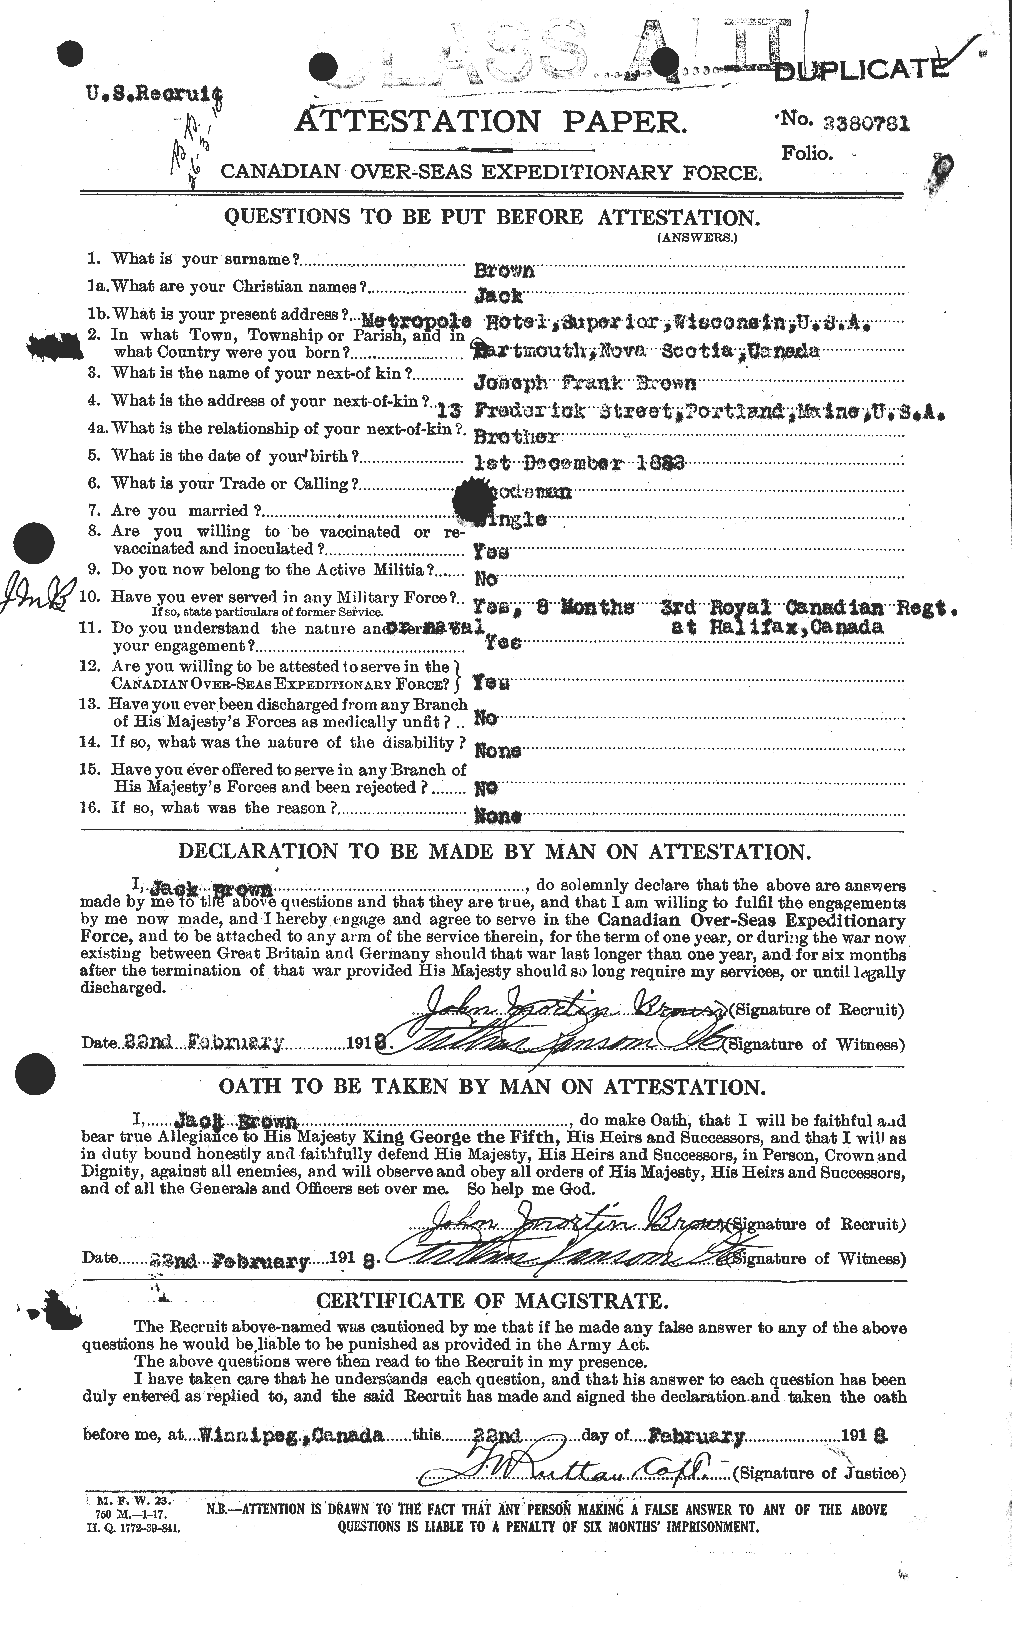 Personnel Records of the First World War - CEF 265682a